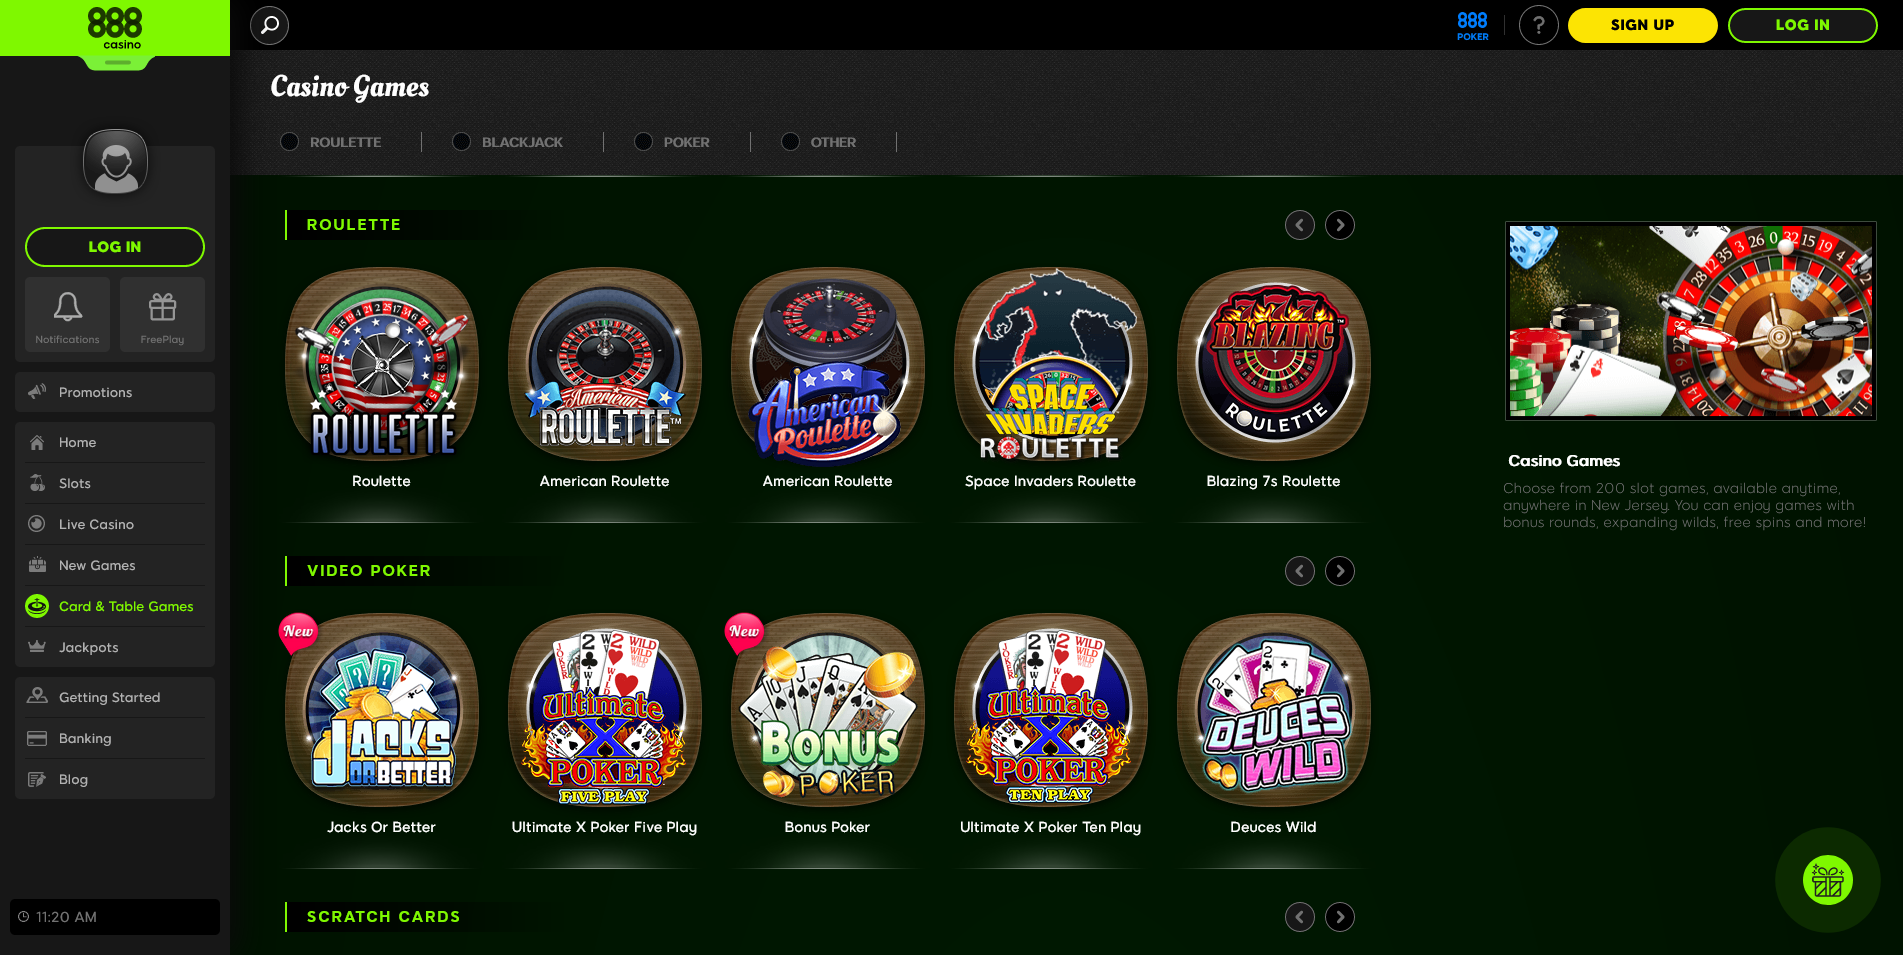 Screenshot of the 888 Casino Live Games Category pages